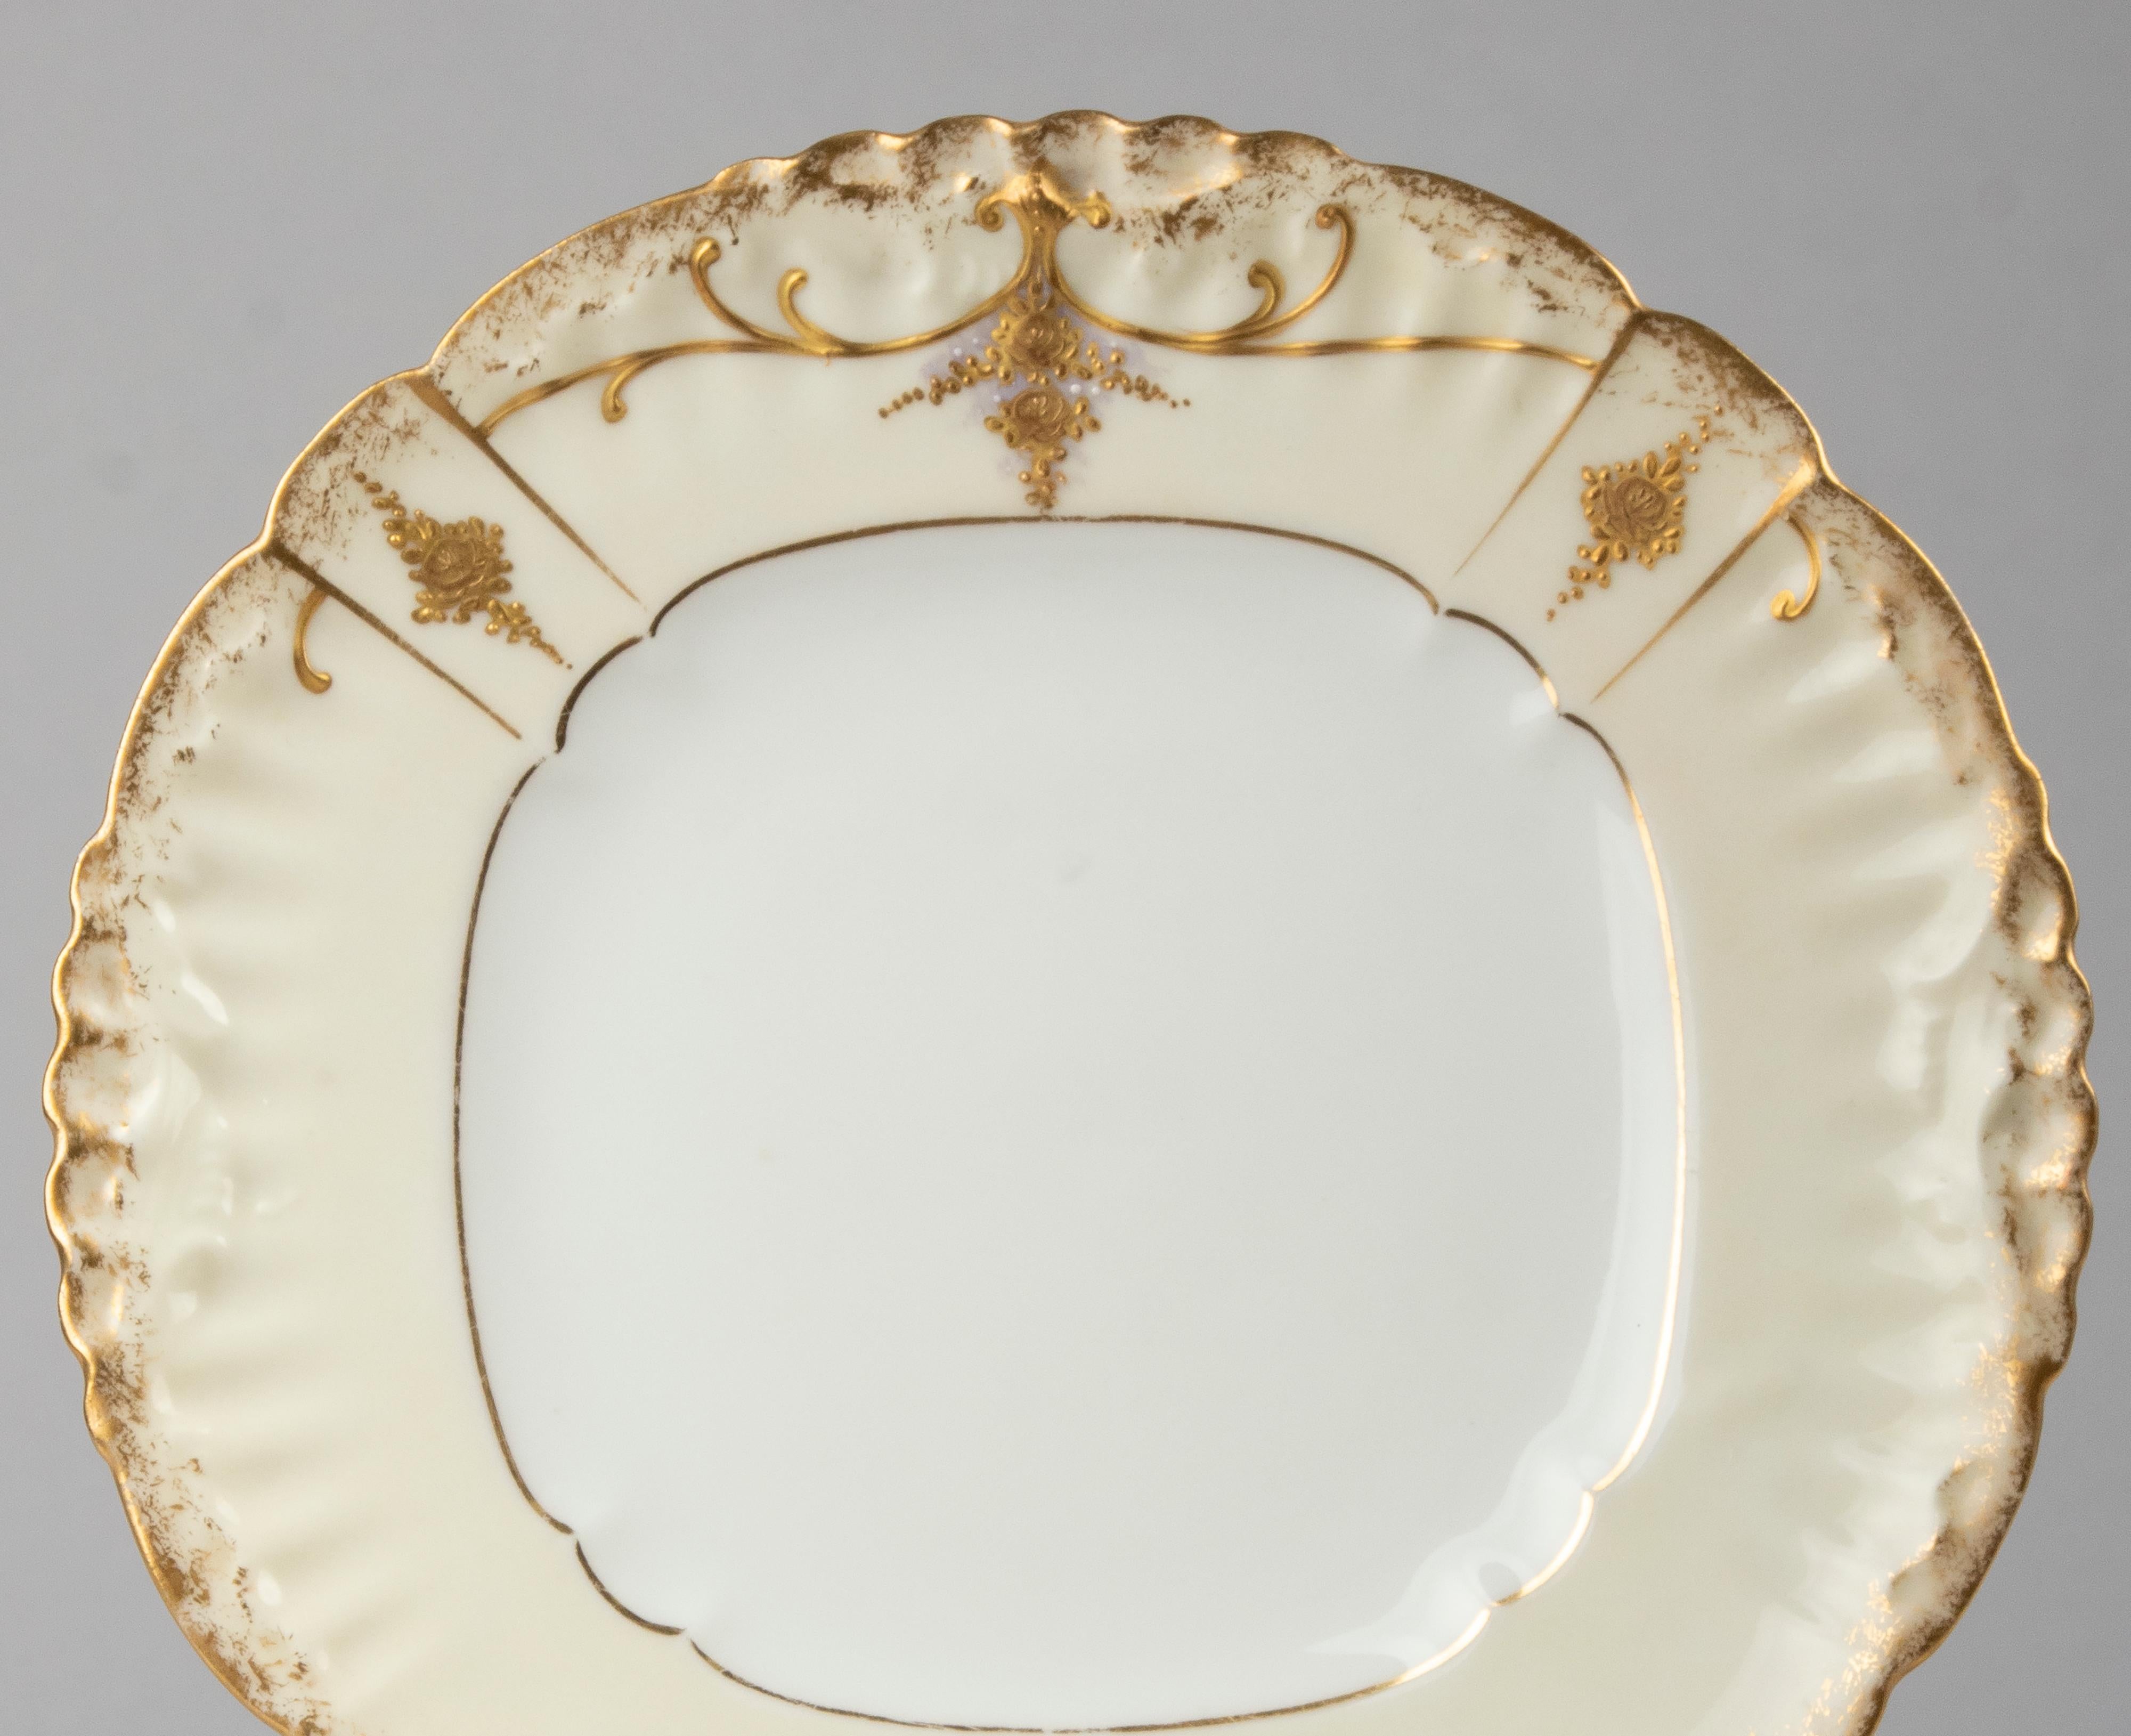 Set of 11 Early 20th Century Porcelain Dessert Plates Gilded by Limoges 6